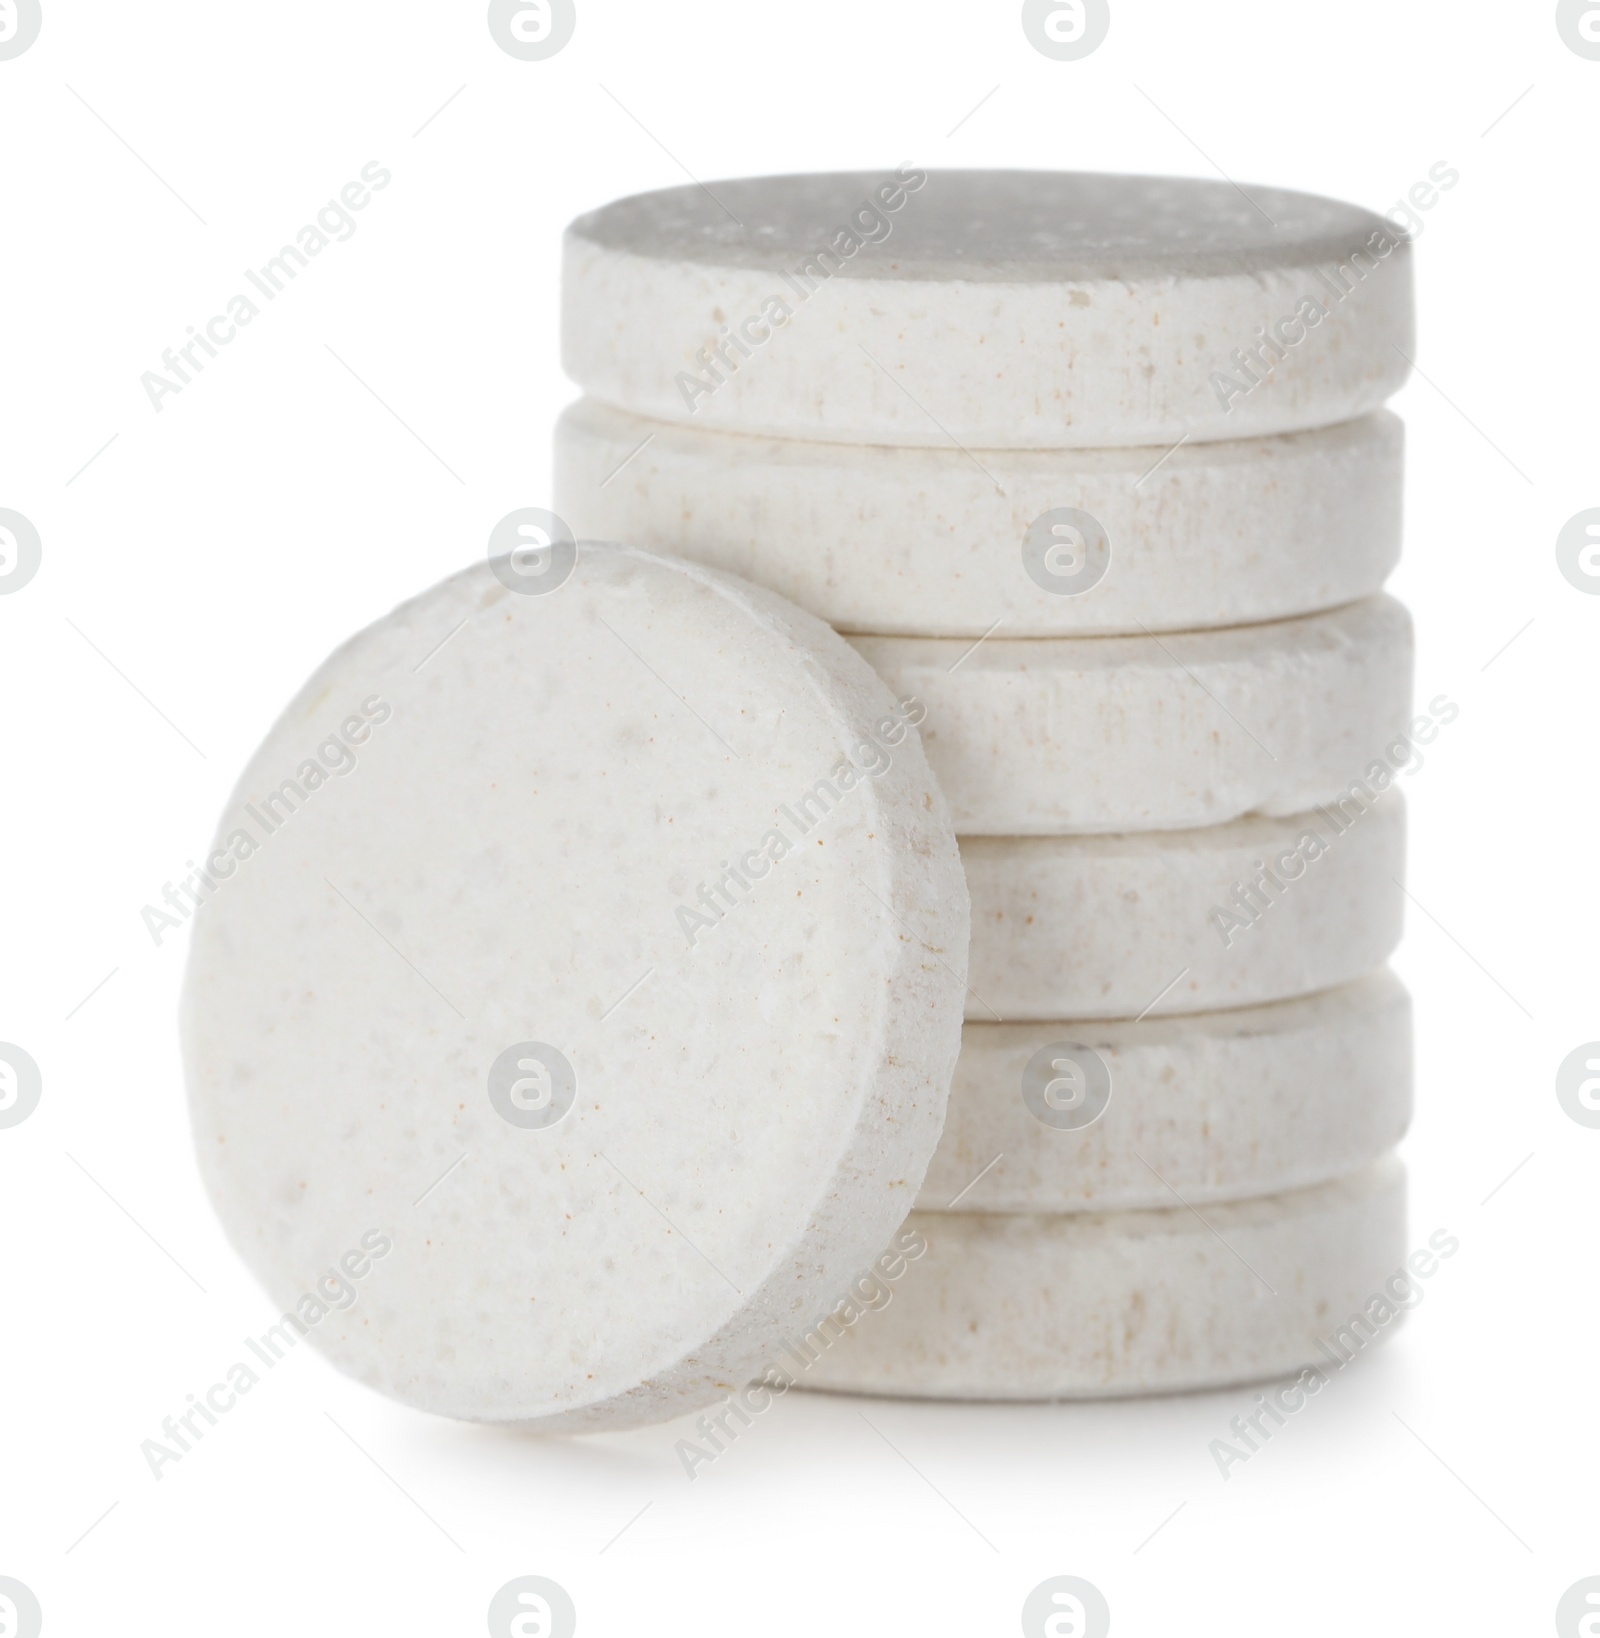 Photo of Pile of vitamin pills on white background